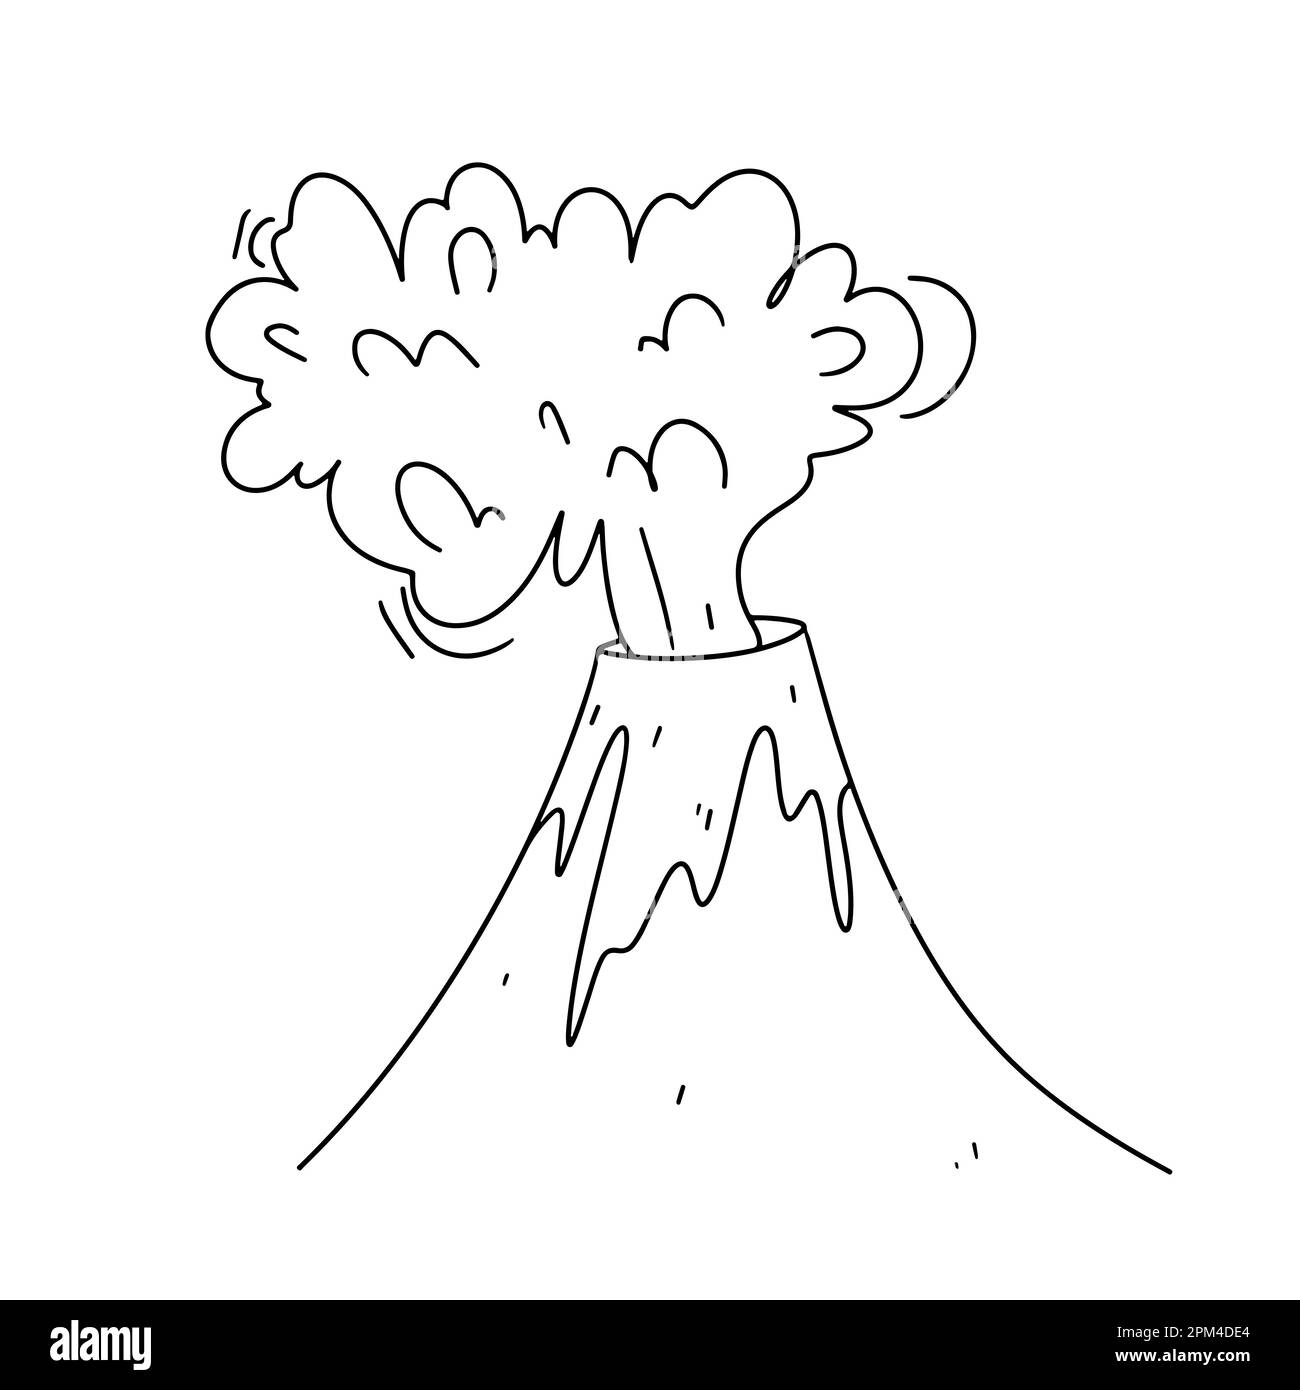 Volcano eruption in hand drawn doodle style. Vector illustration isolated on white background. Coloring book. Stock Vector